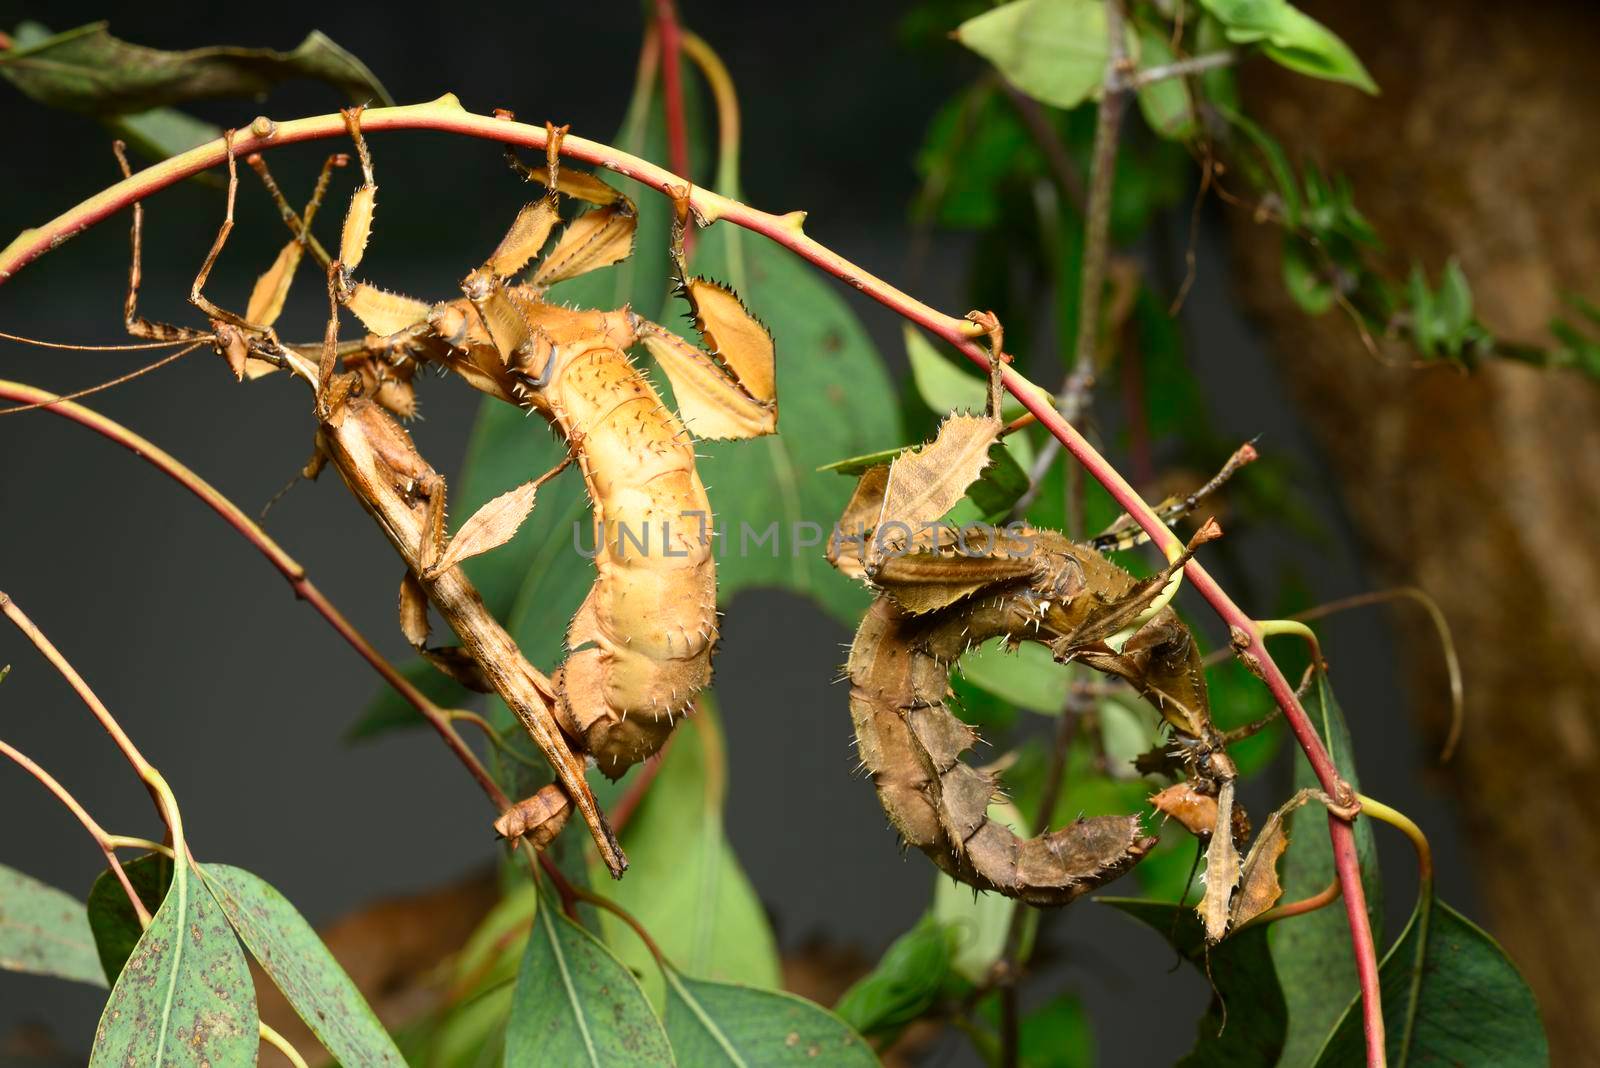 Spiny leaf insect, large species of Australian stick insect, Extatosoma tiaratum